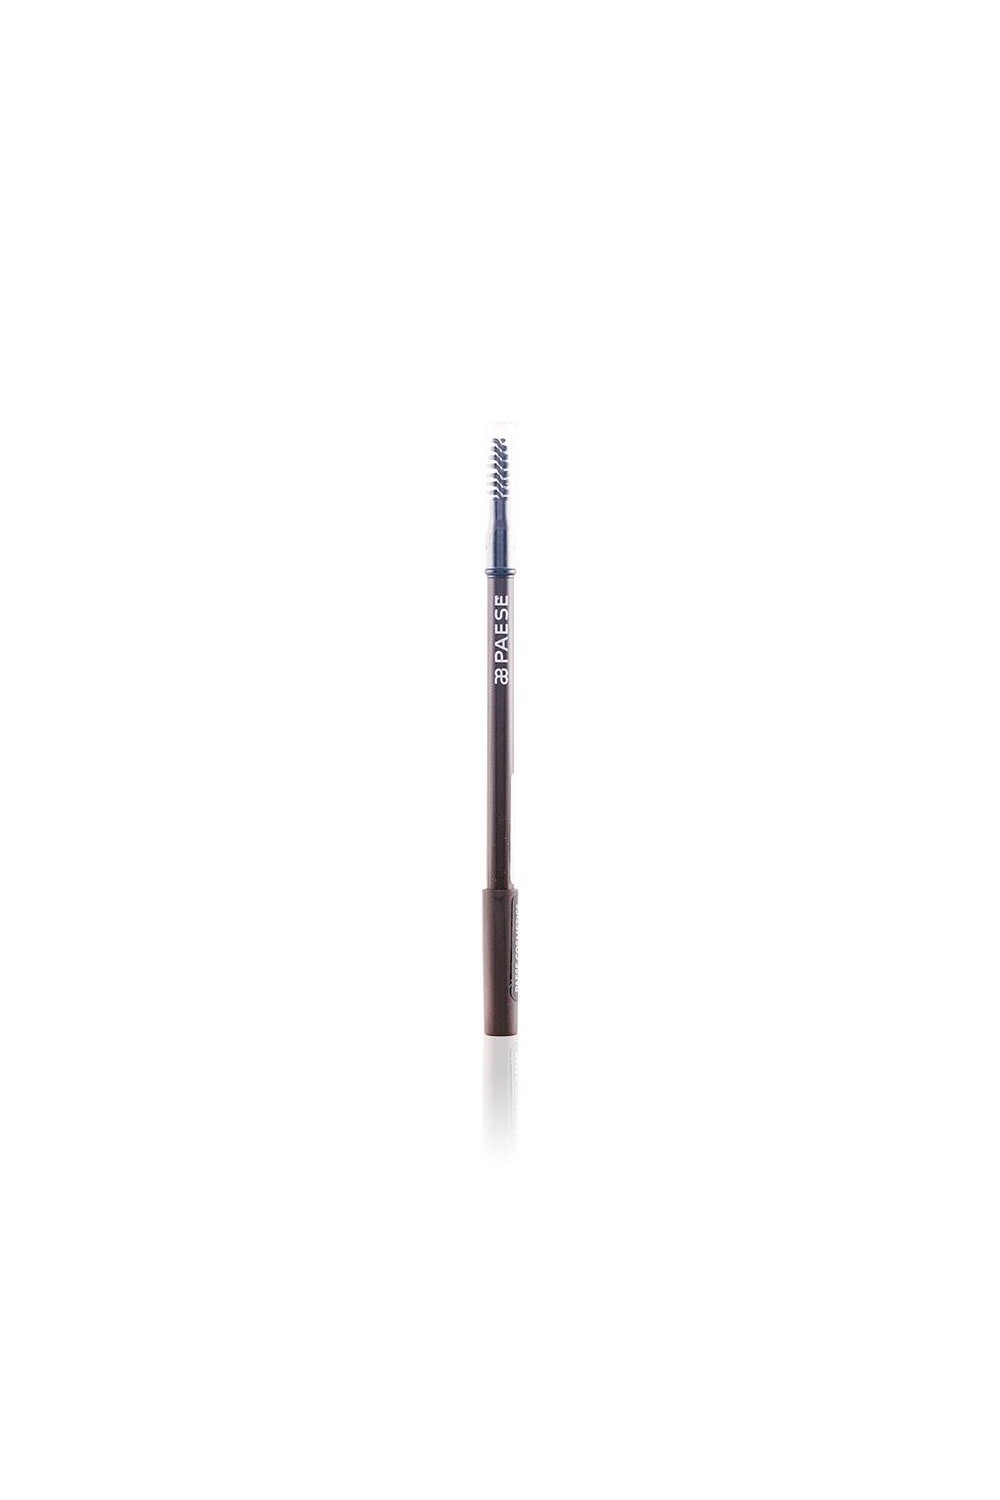 PAESE COSMETICS - Paese Browsetter Pencil Dark Brown